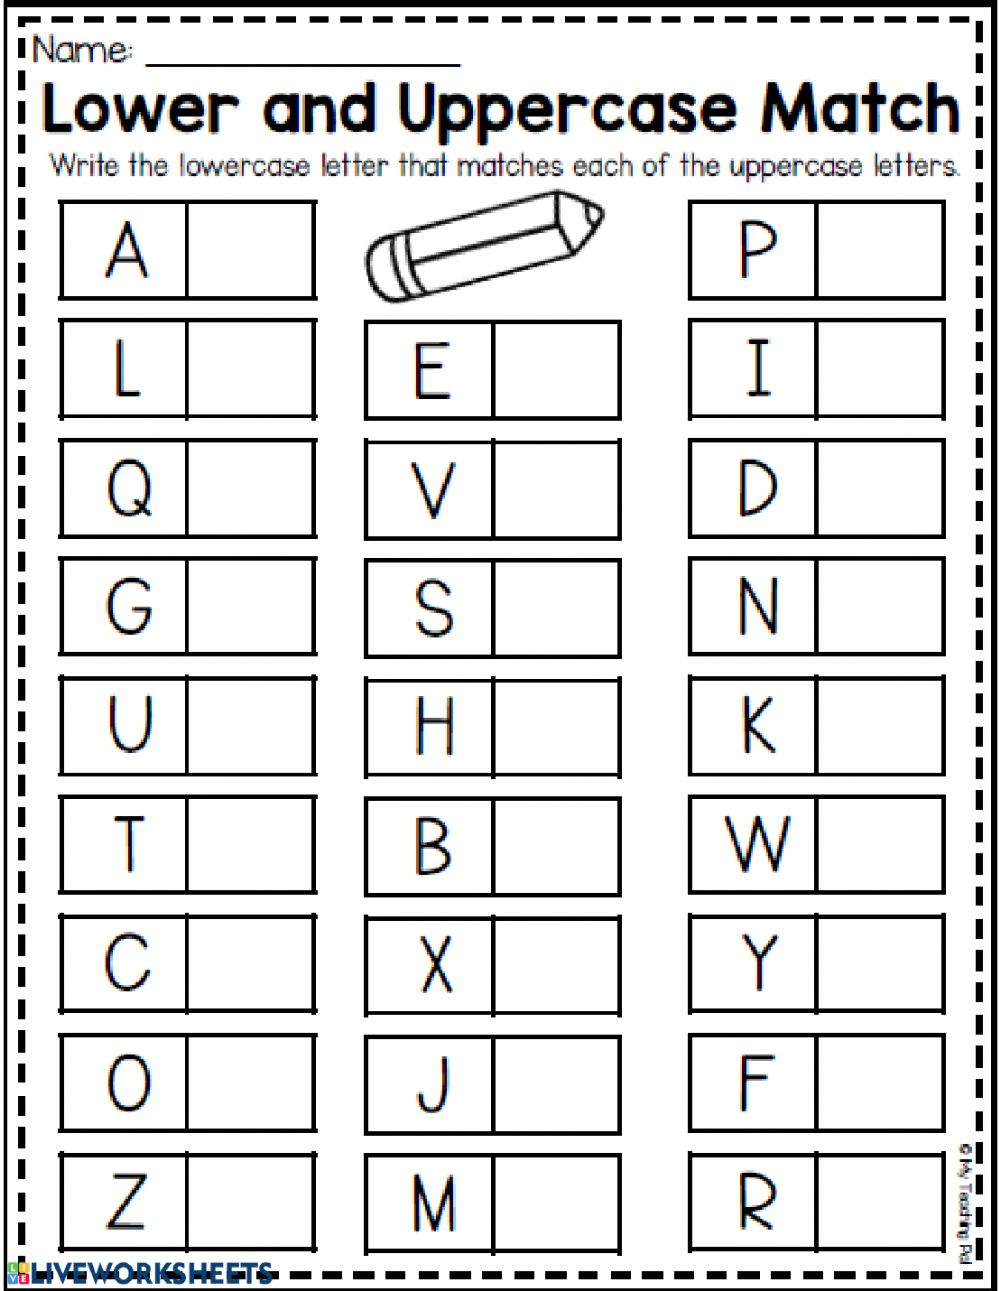 lower-and-uppercase-match-worksheet-c4f